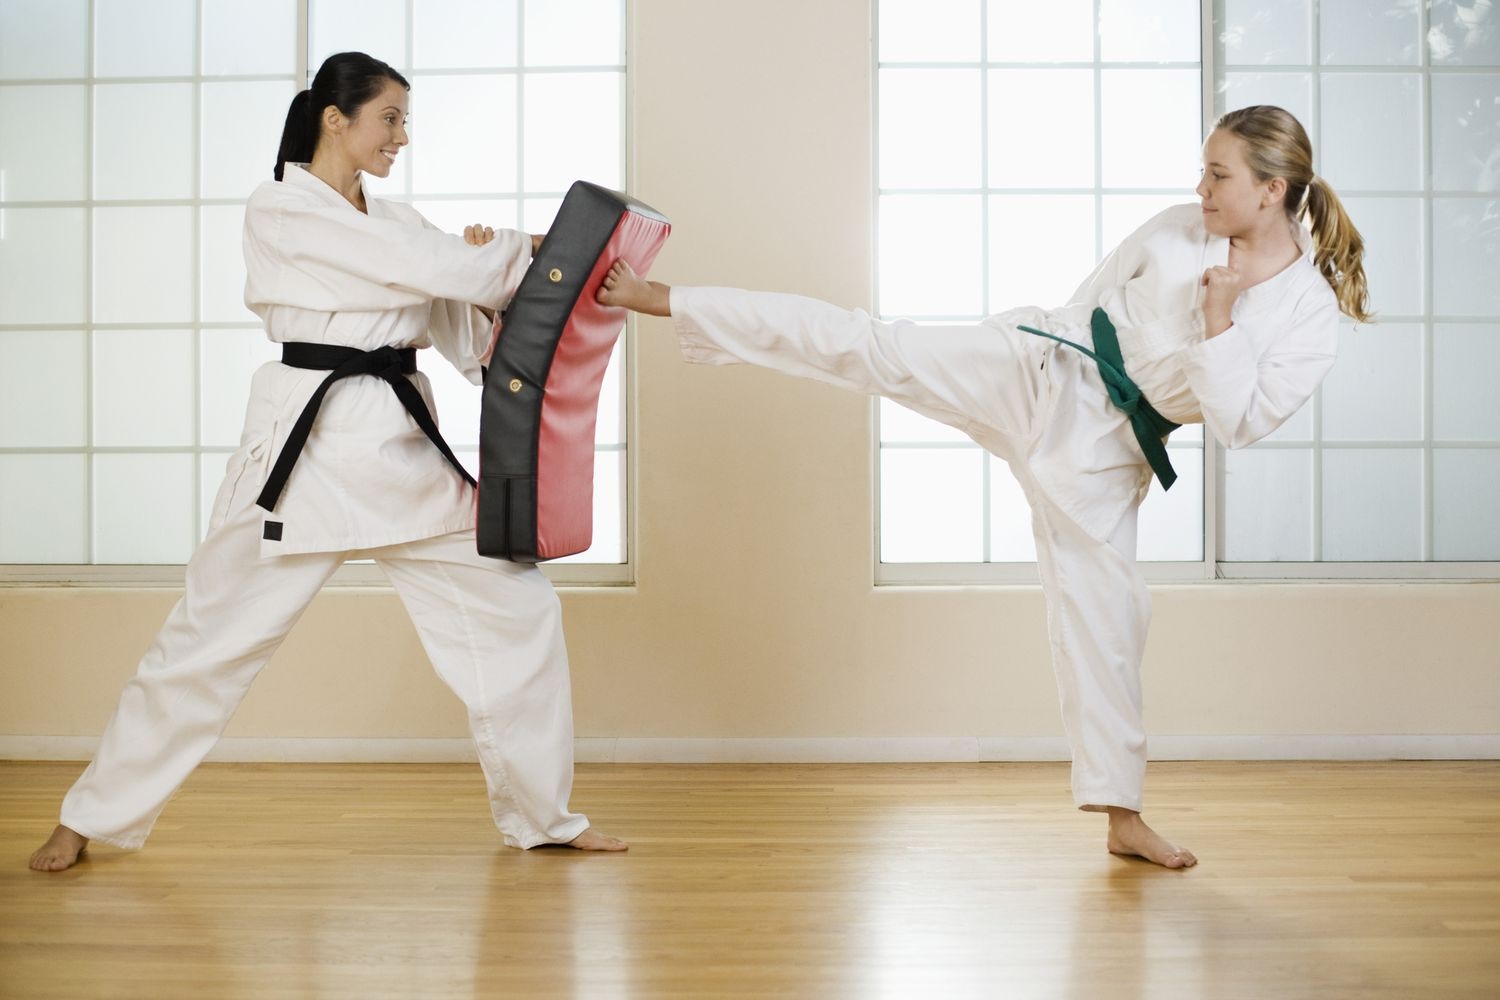 Important Things To Know About Martial Arts Before Joining